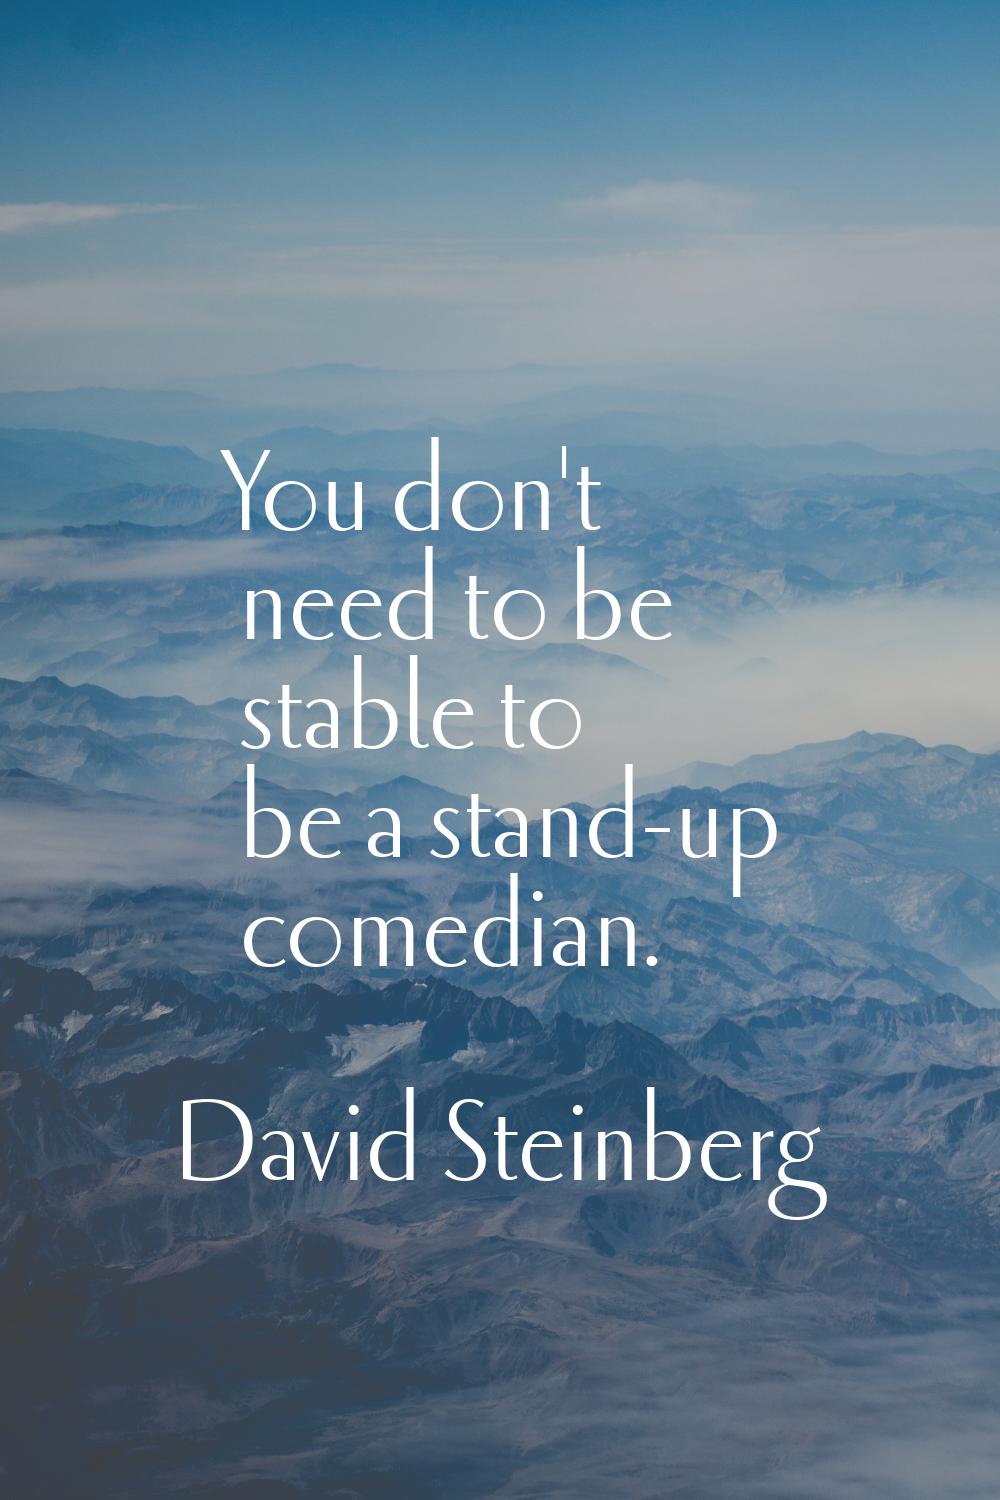 You don't need to be stable to be a stand-up comedian.